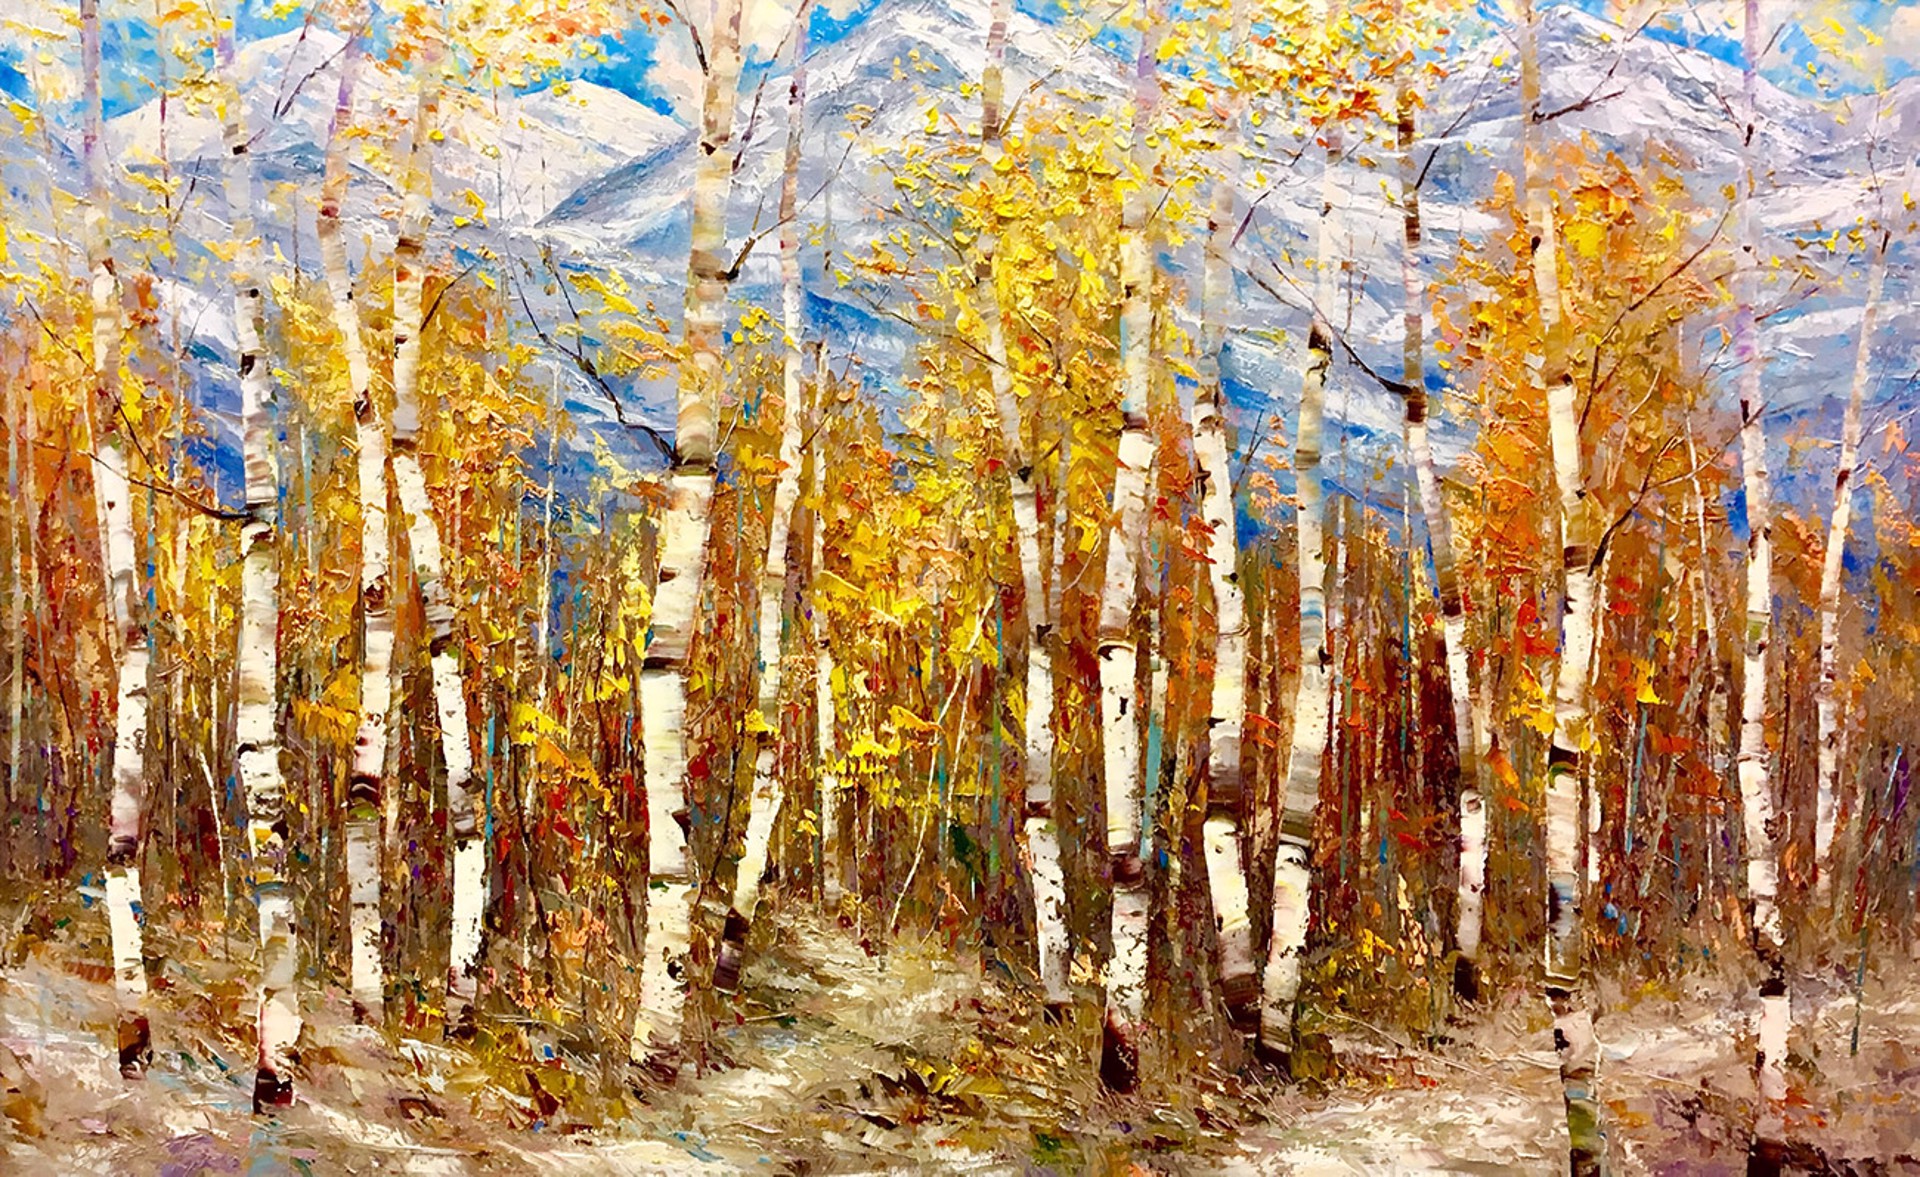 Early Fall (SOLD) by DEAN BRADSHAW